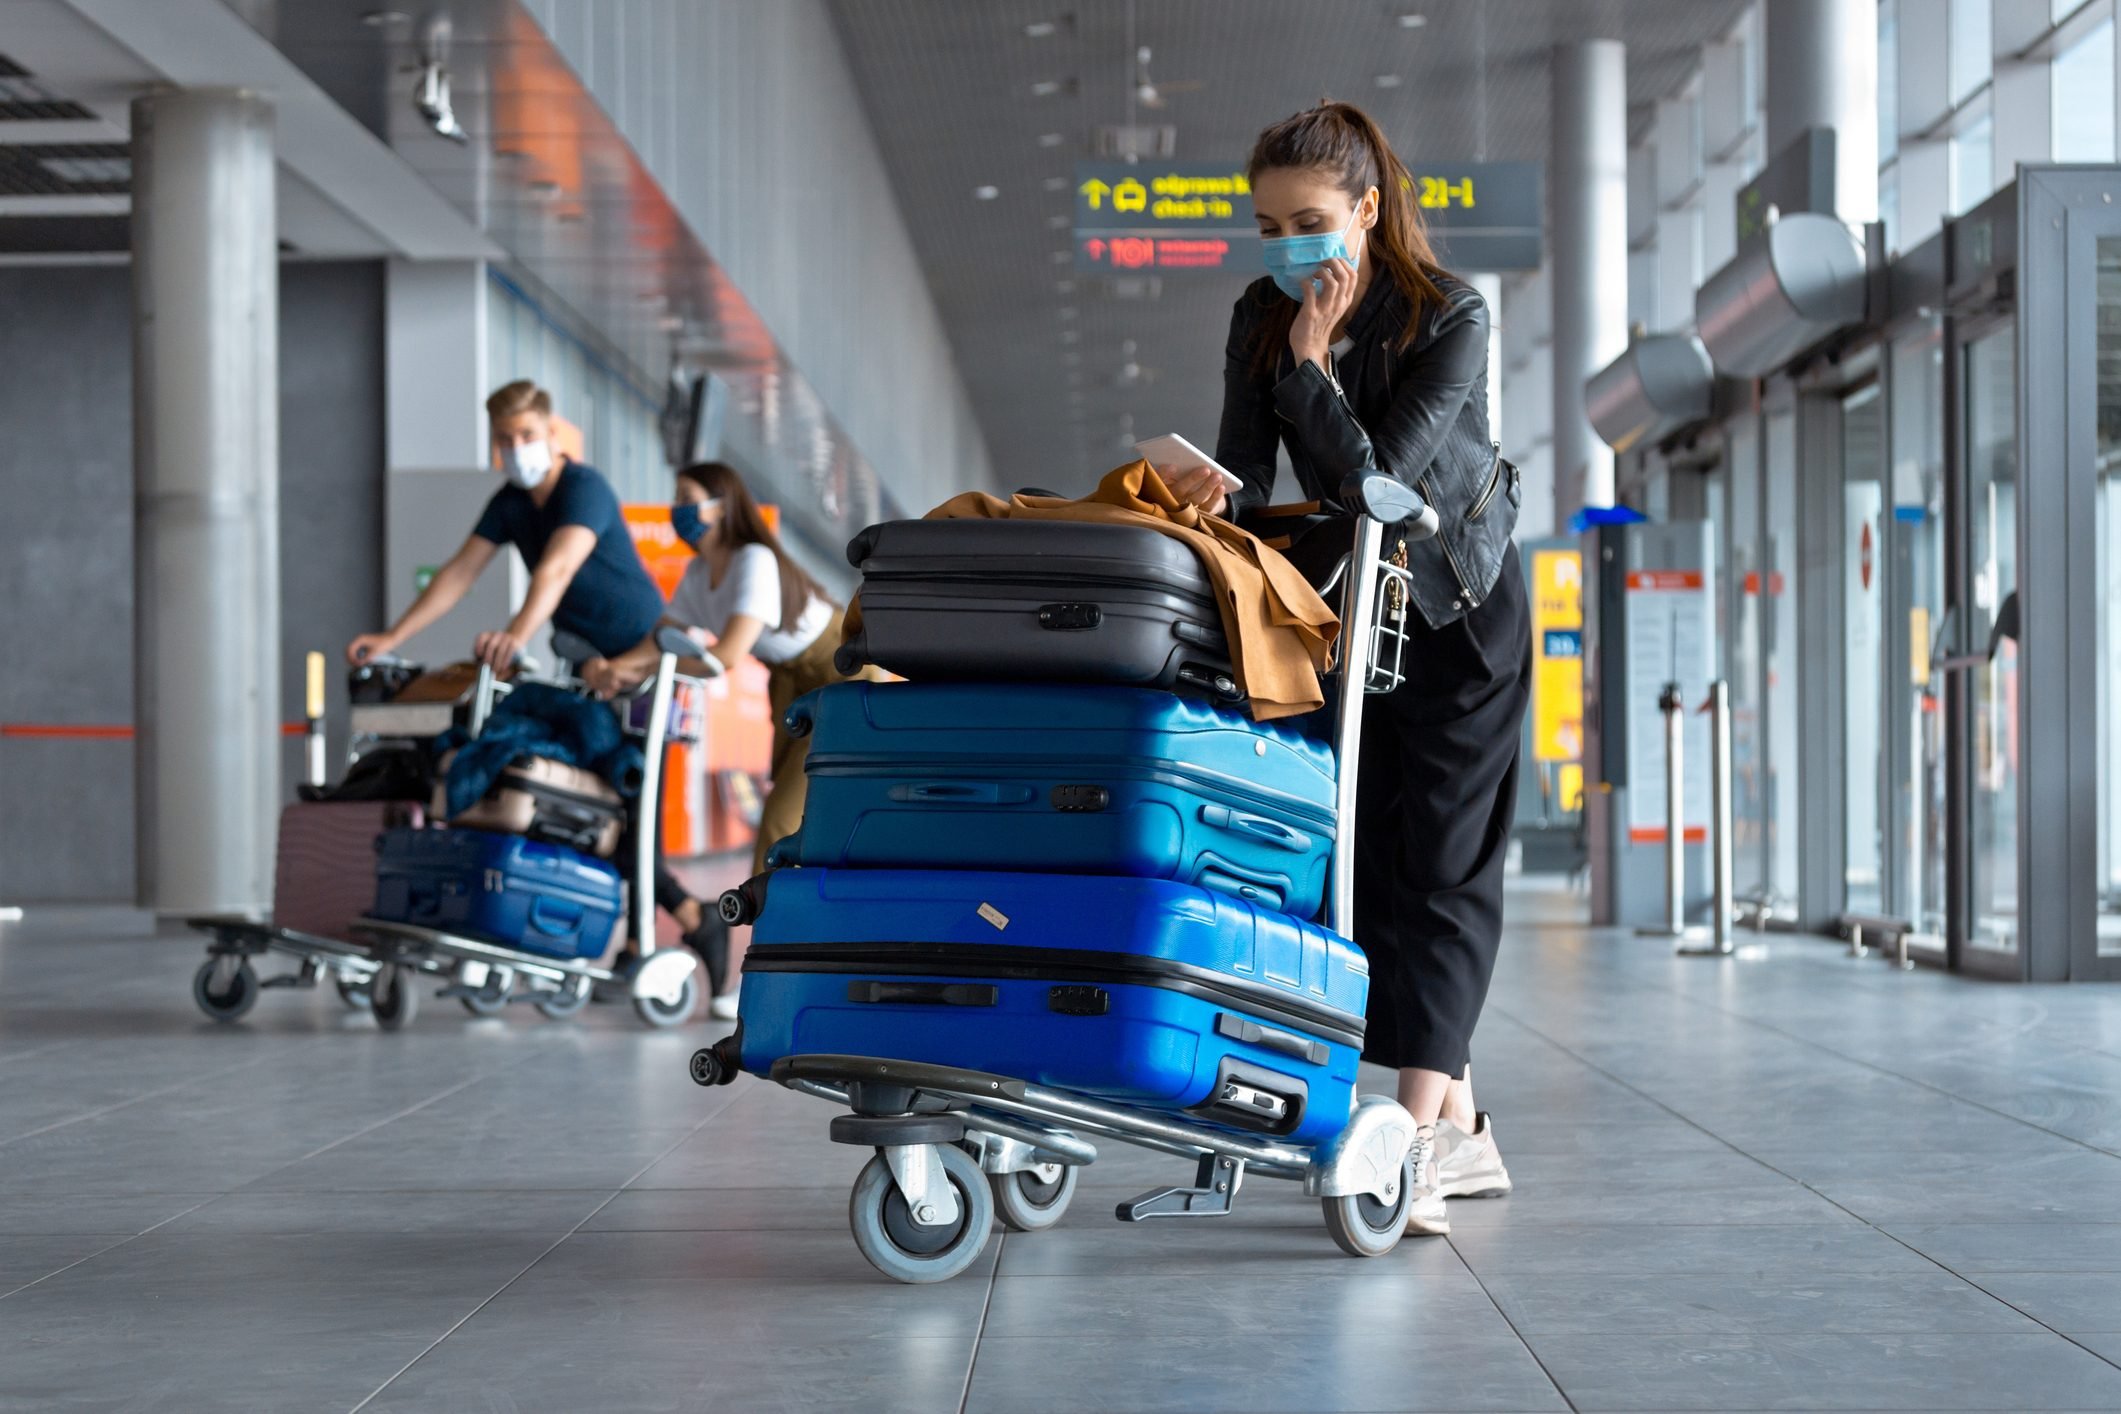 Passengers at the airport with luggage, wearing N95 face masks